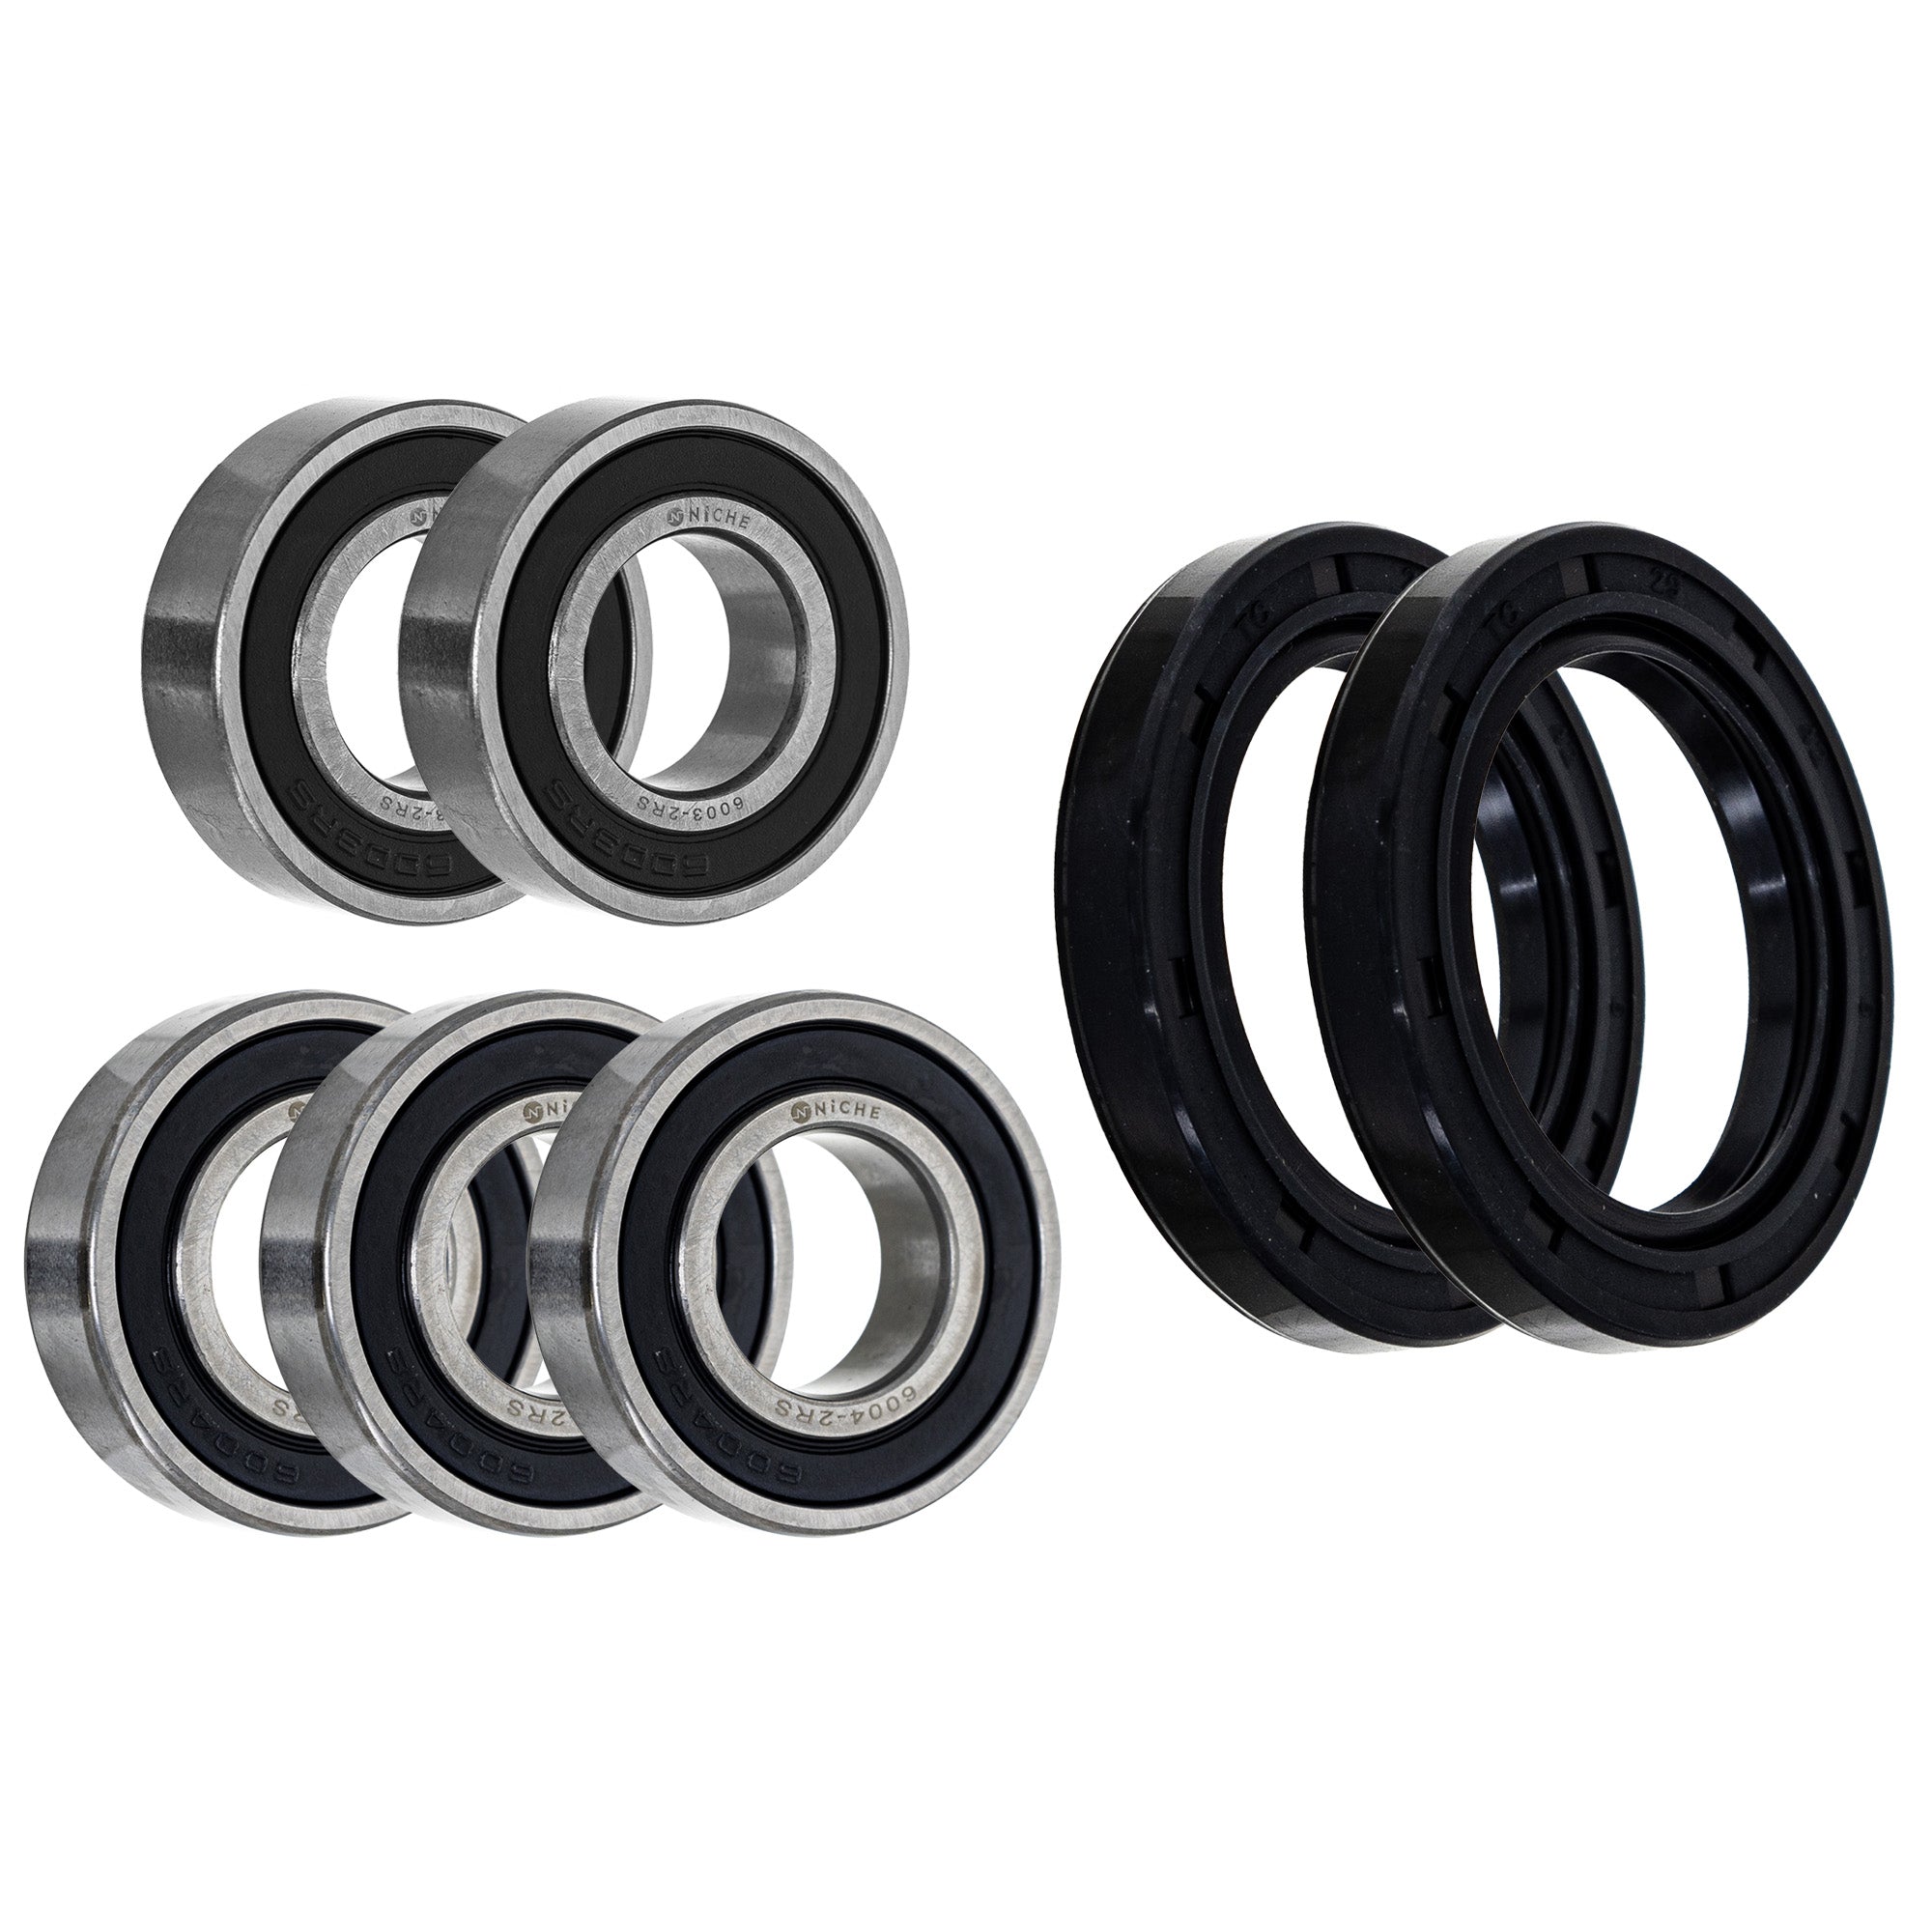 Wheel Bearing Seal Kit for zOTHER Ref No RM125 NICHE MK1008742